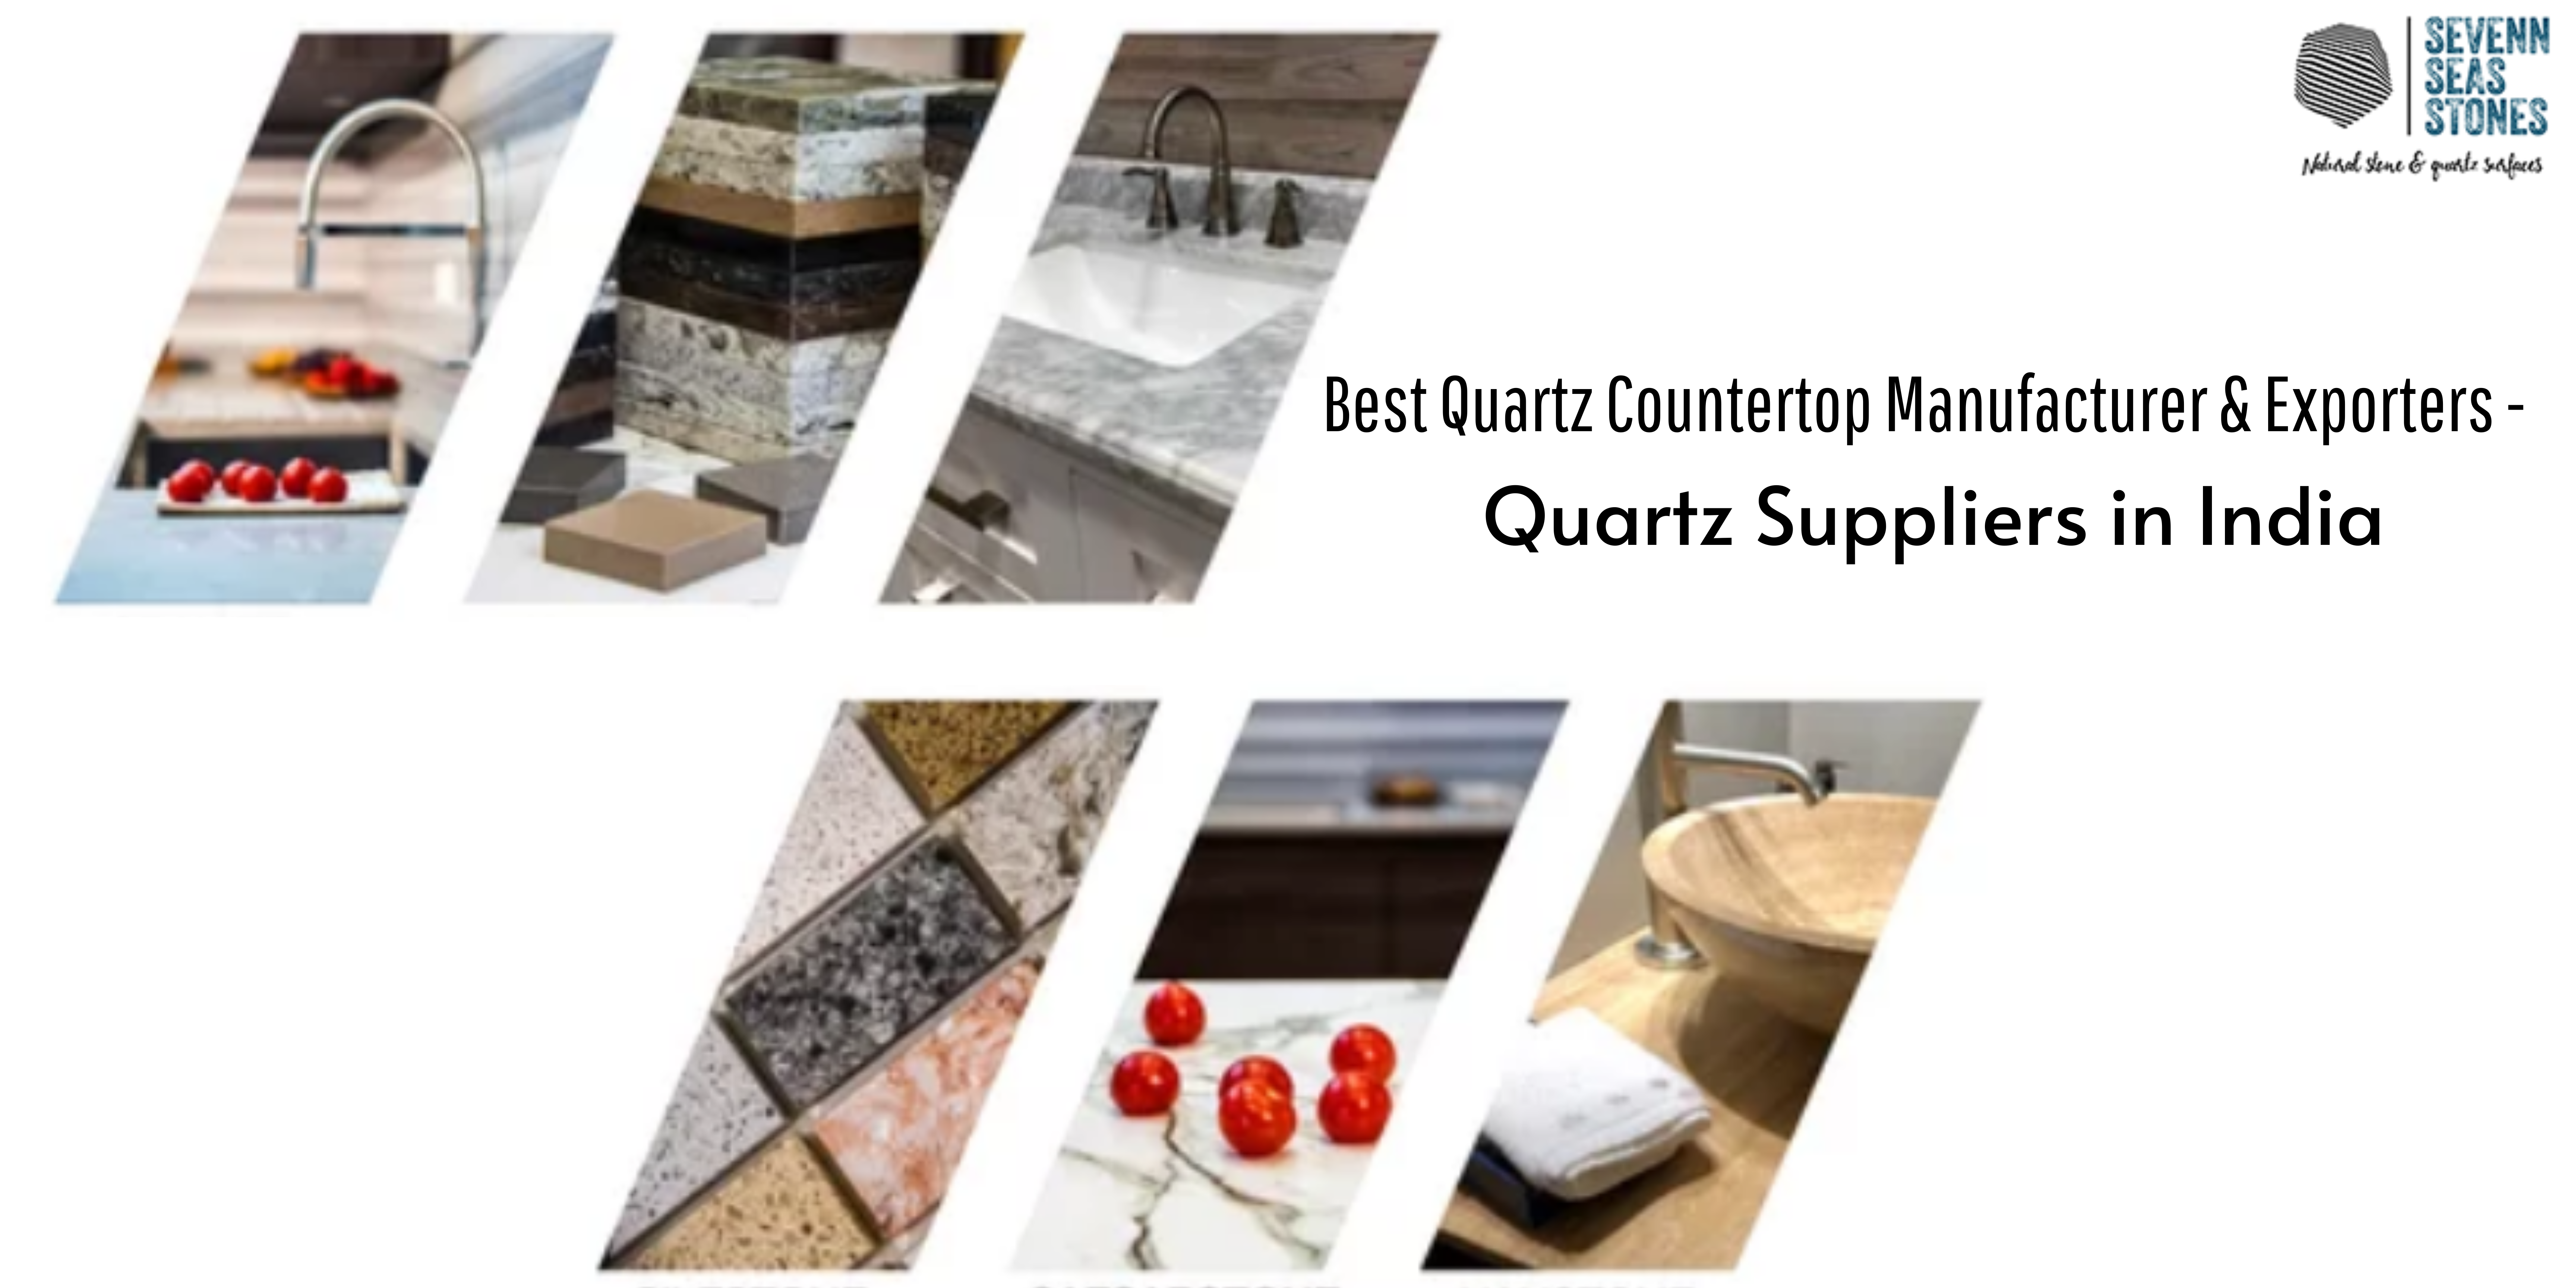 How To Clean Quartz Countertops In Kitchens